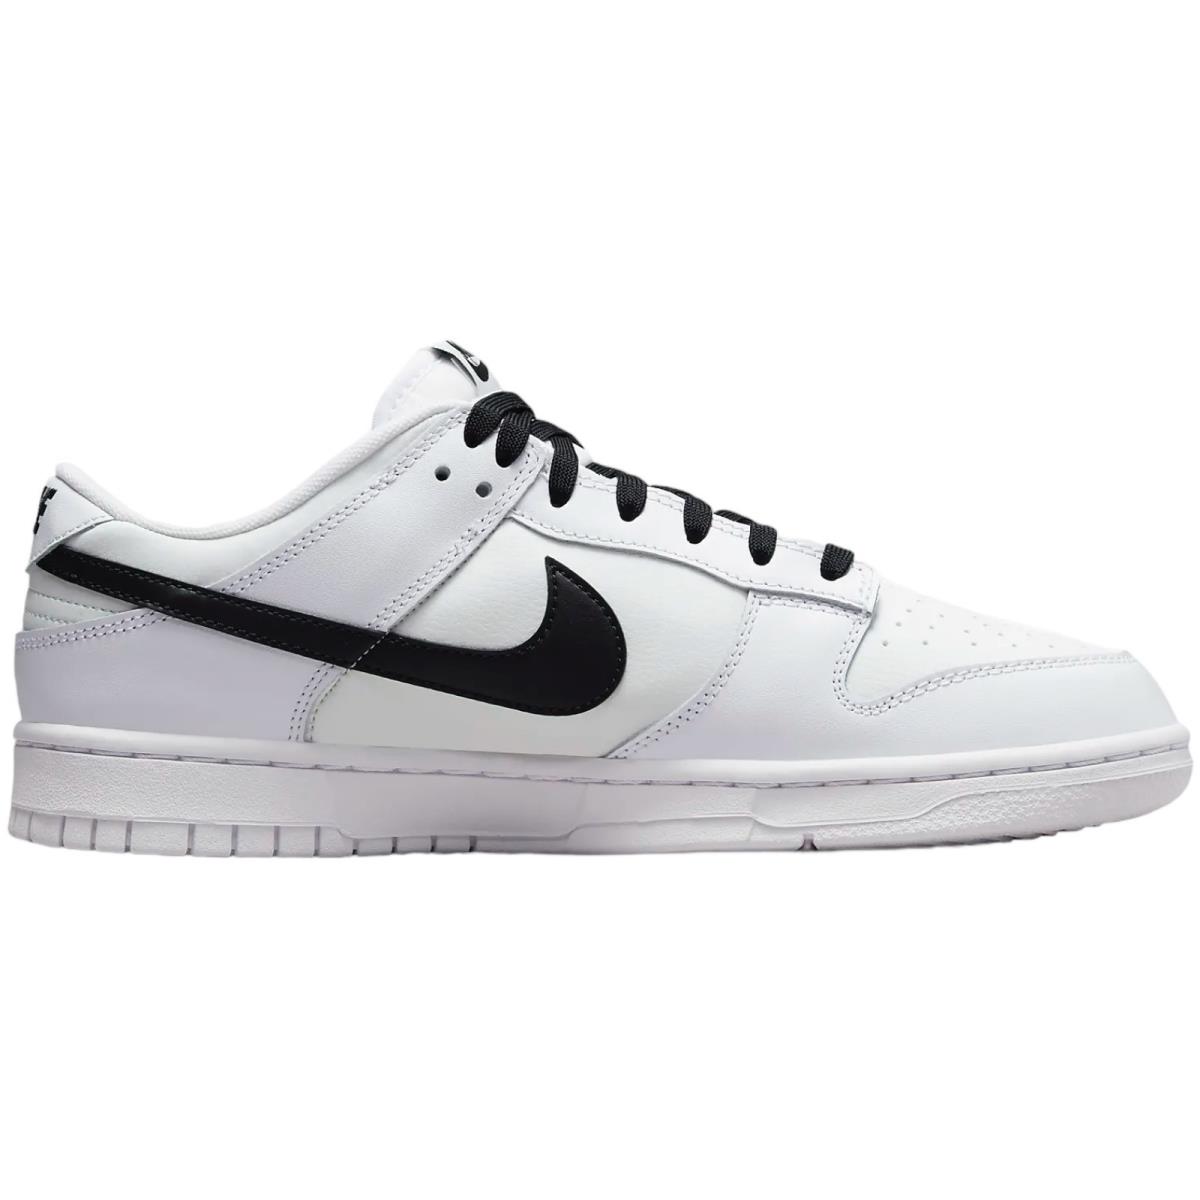 Nike Dunk Low Retro Men`s Casual Shoes All Colors US Sizes 7-14 White/Summit White/Black